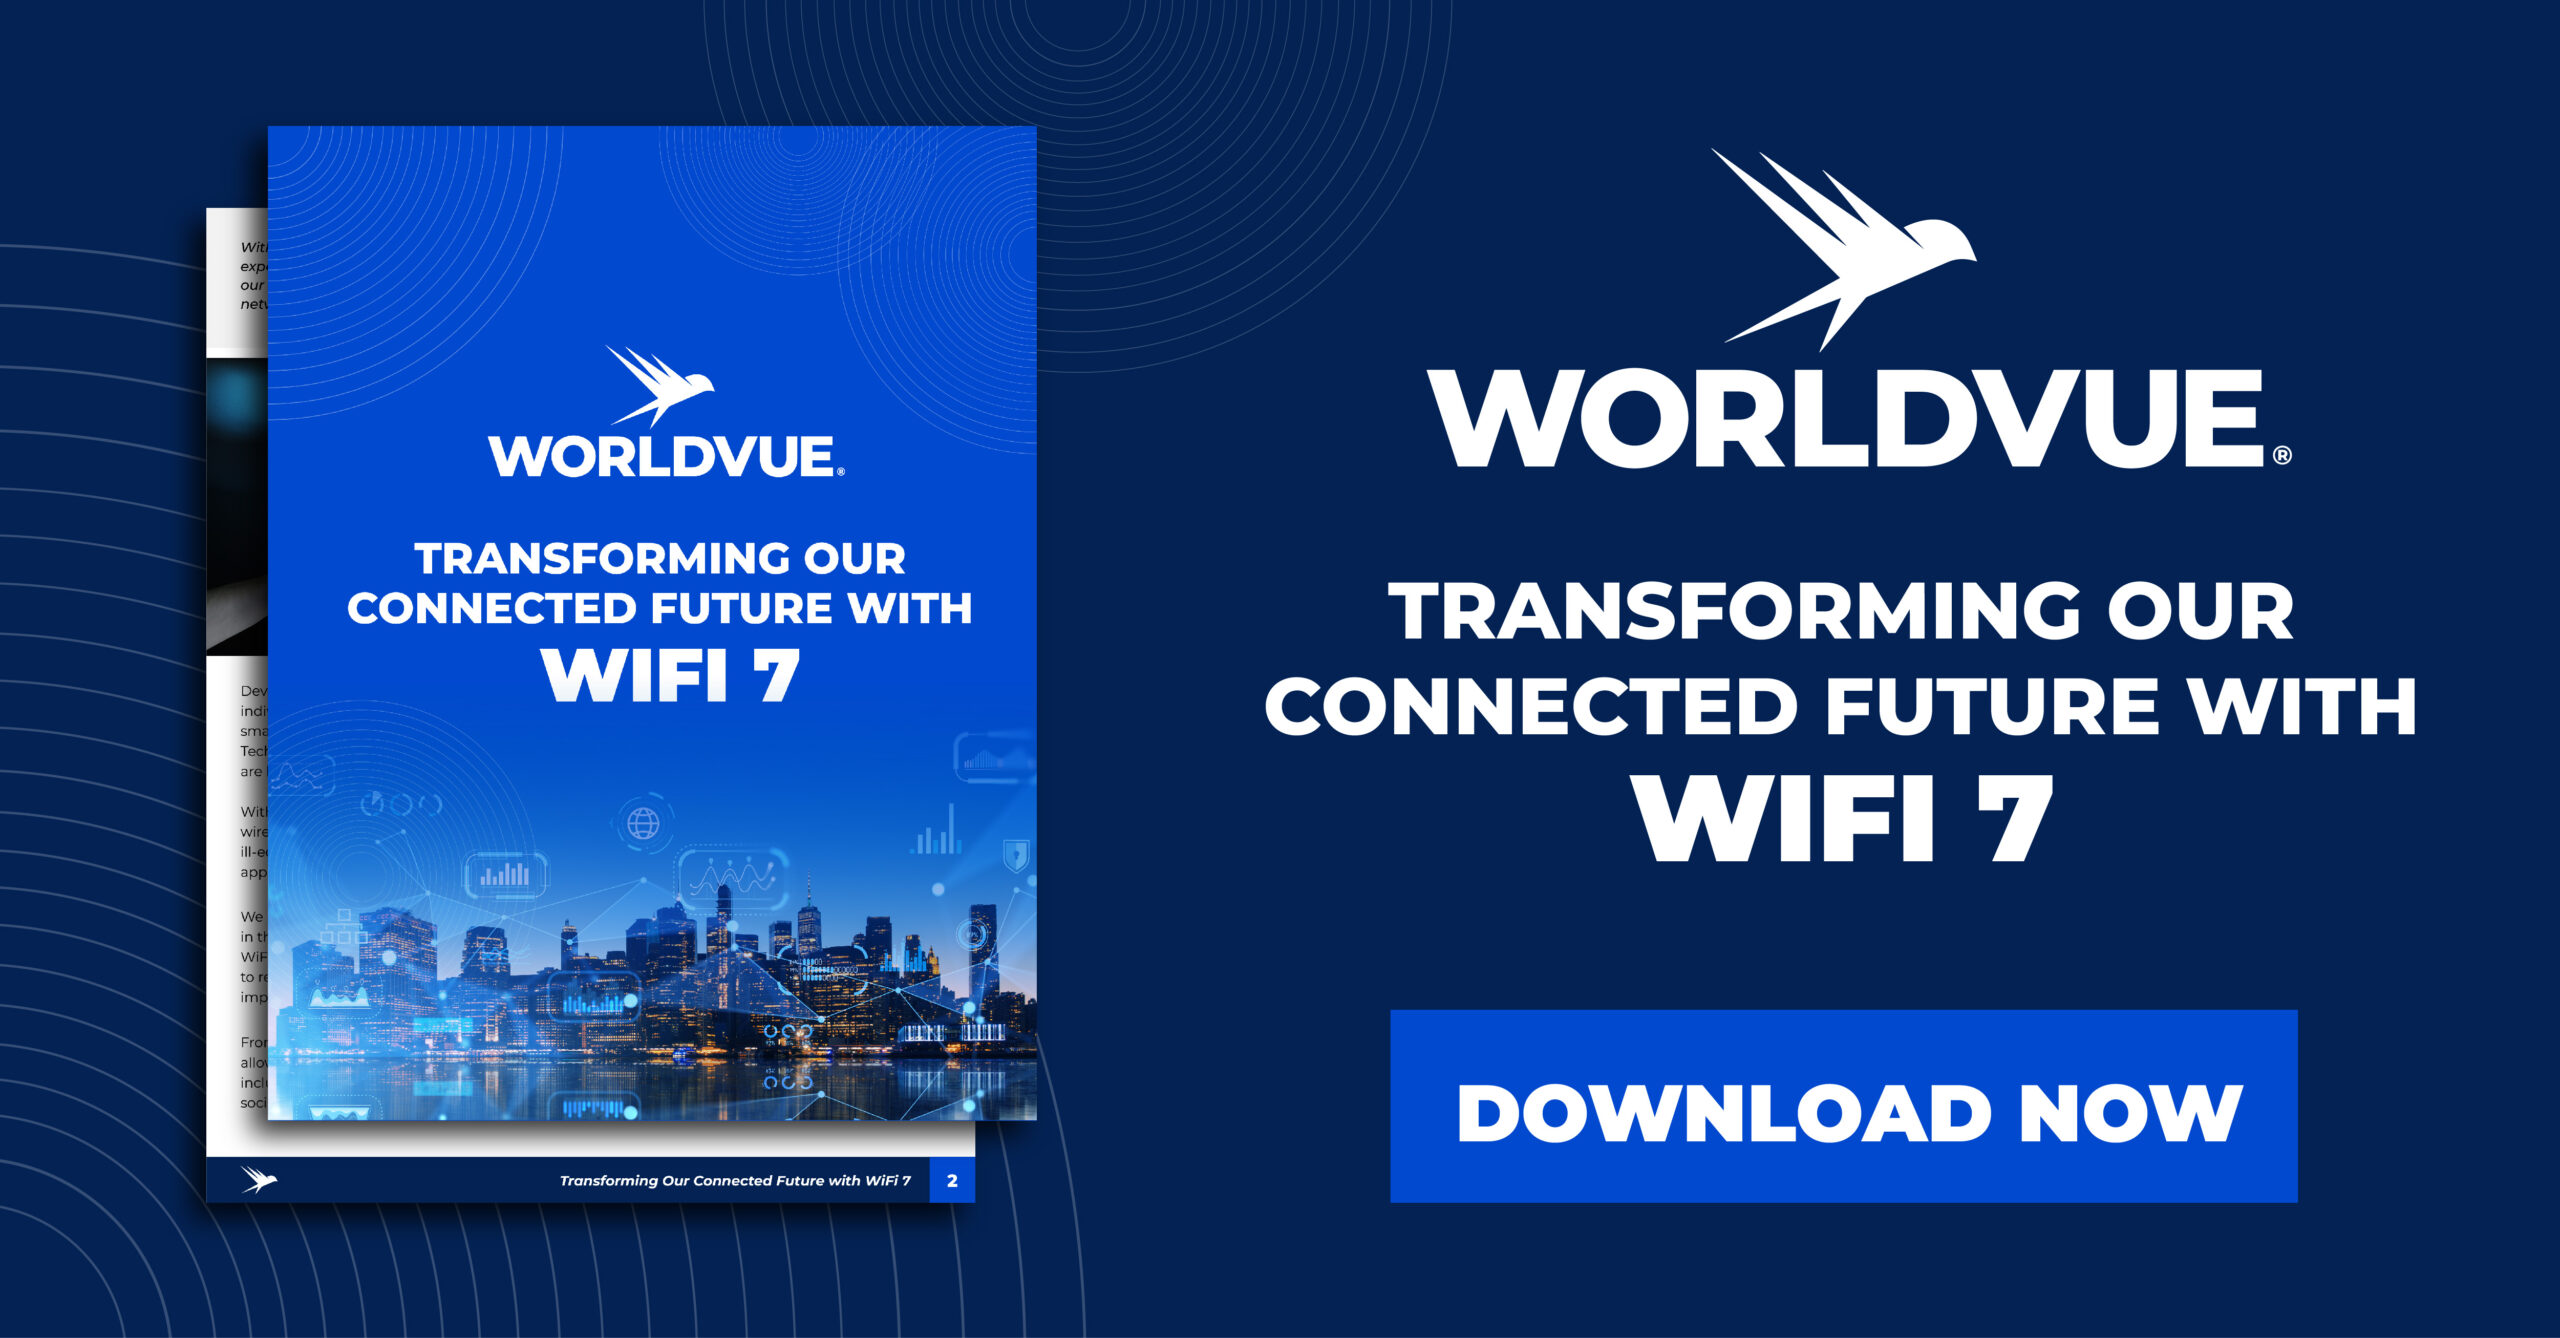 graphic offering download of "Transforming Our Connected Future with WiFi 7" white paper